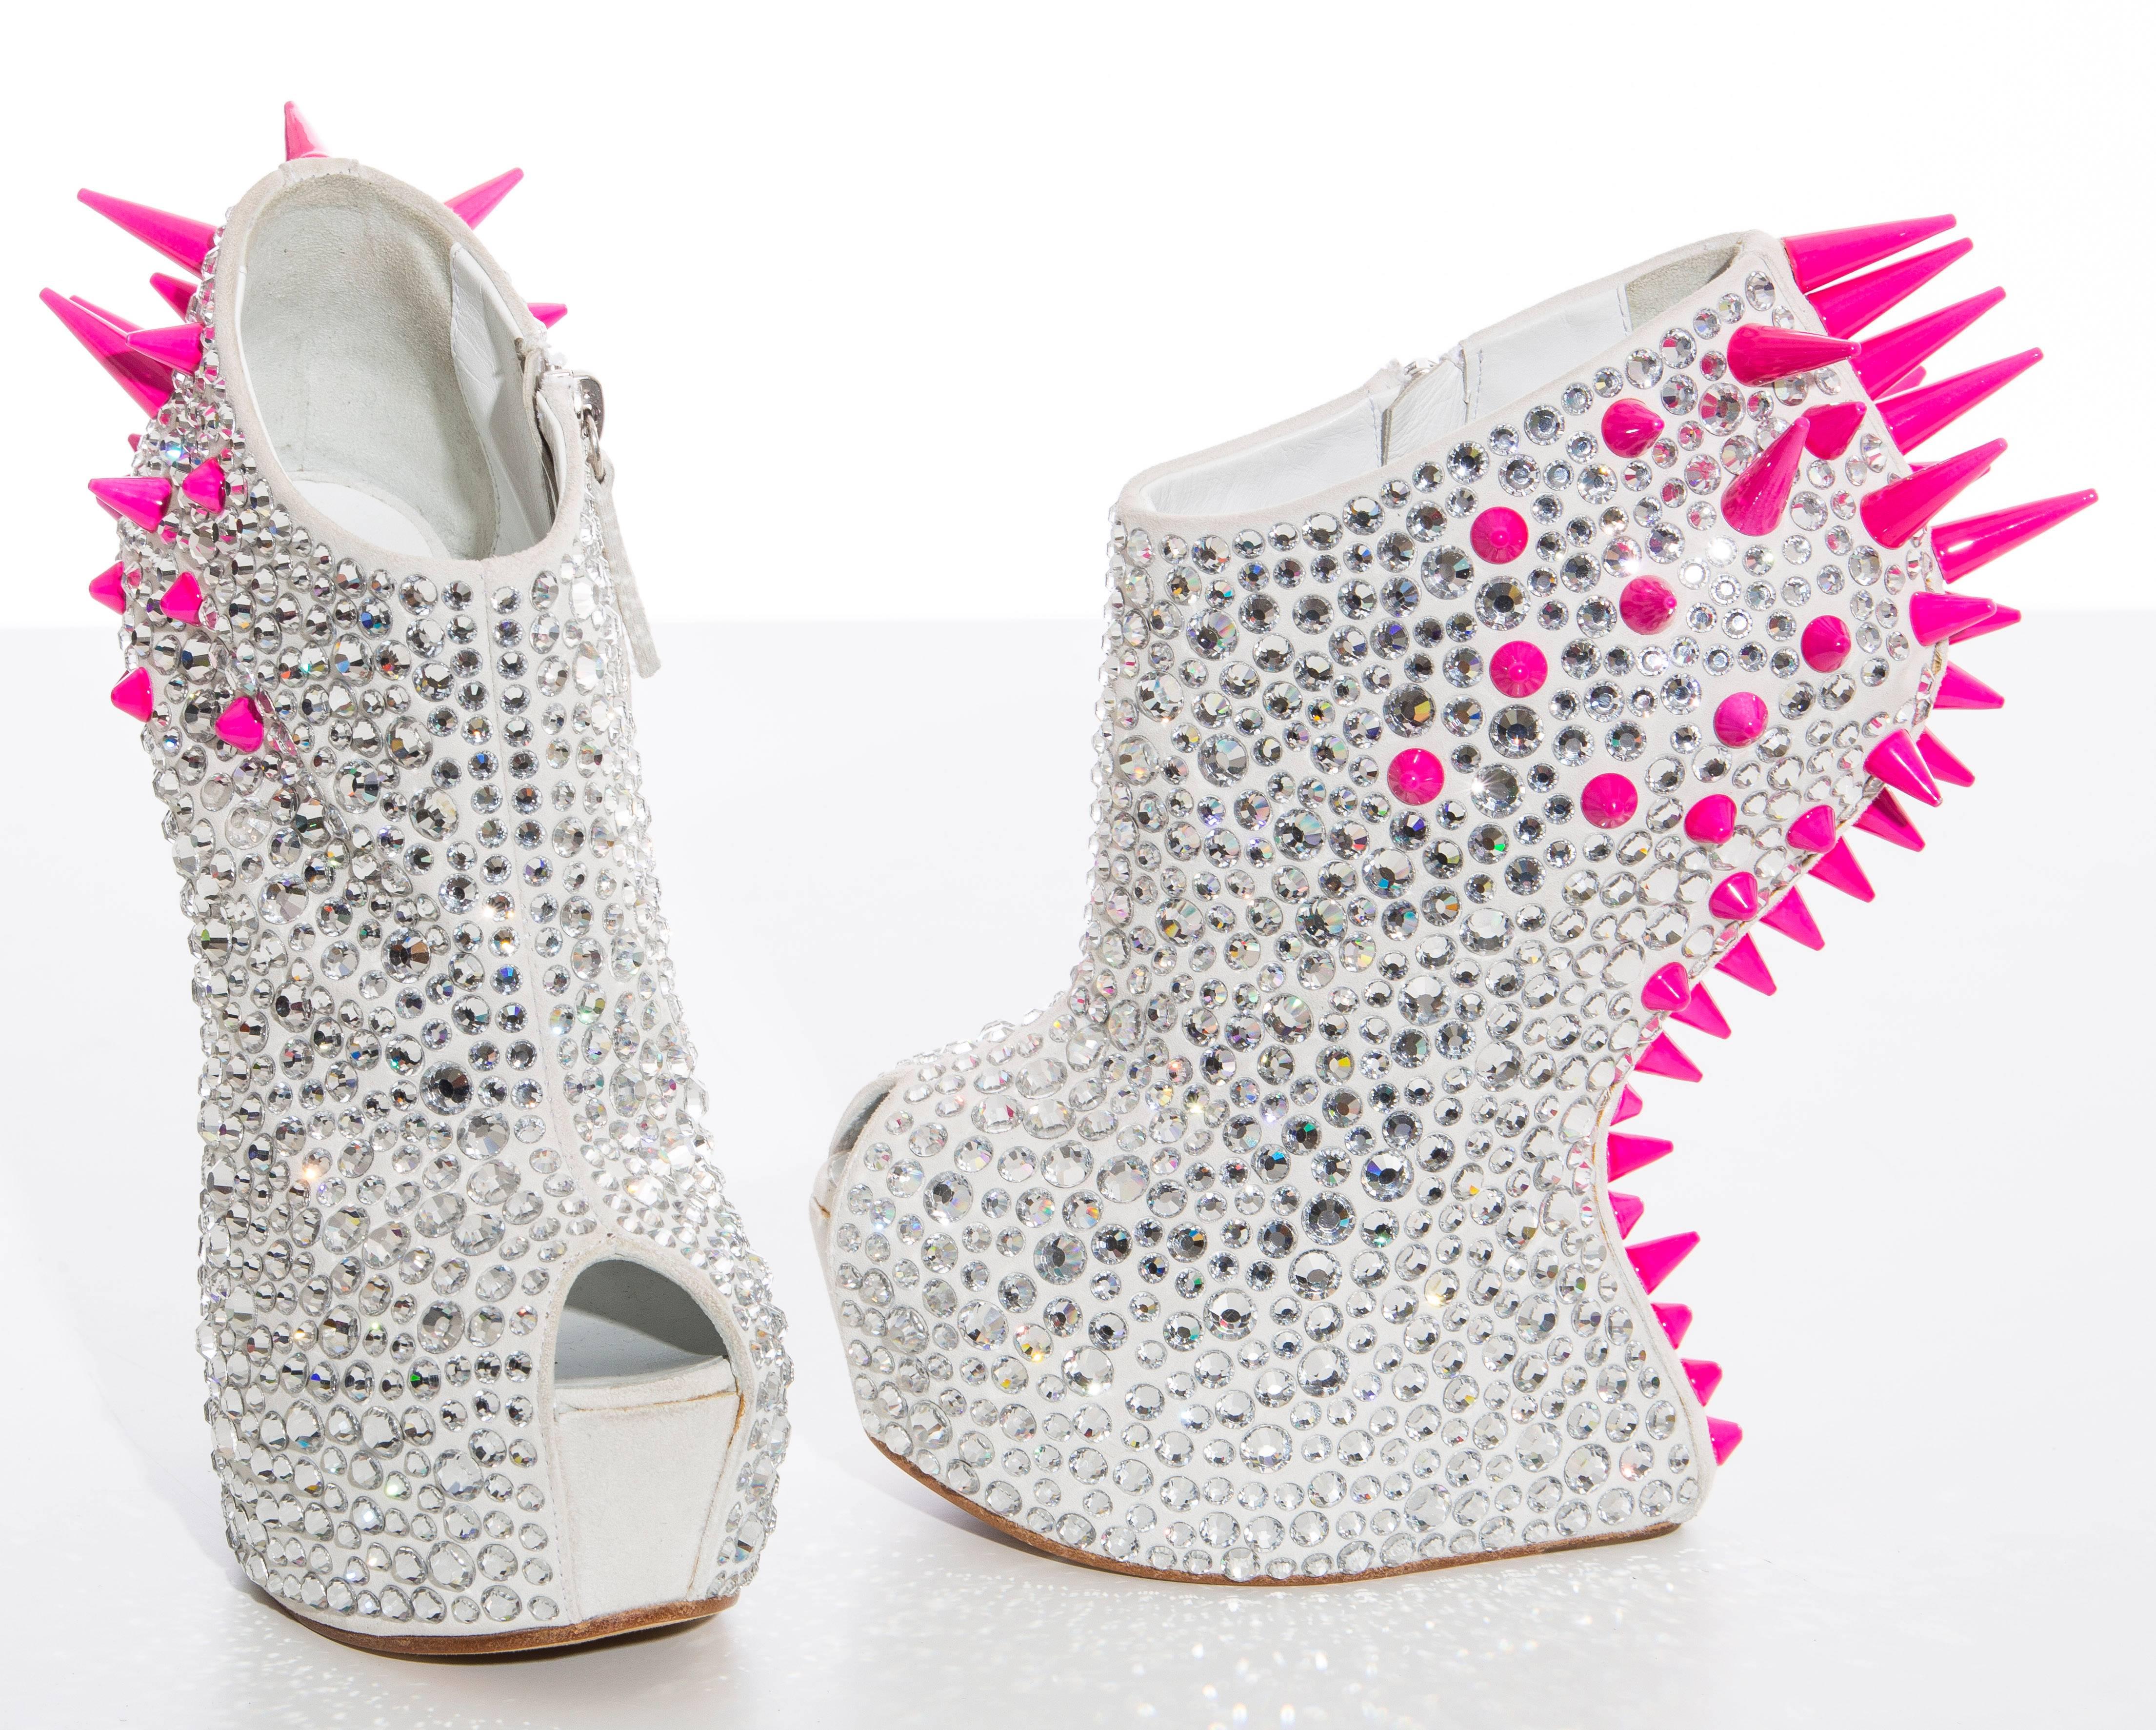 Gray Guiseppe Zanotti Swarovski Crystal & Pink Spiked-Embellished Wedges Fall 2012 For Sale